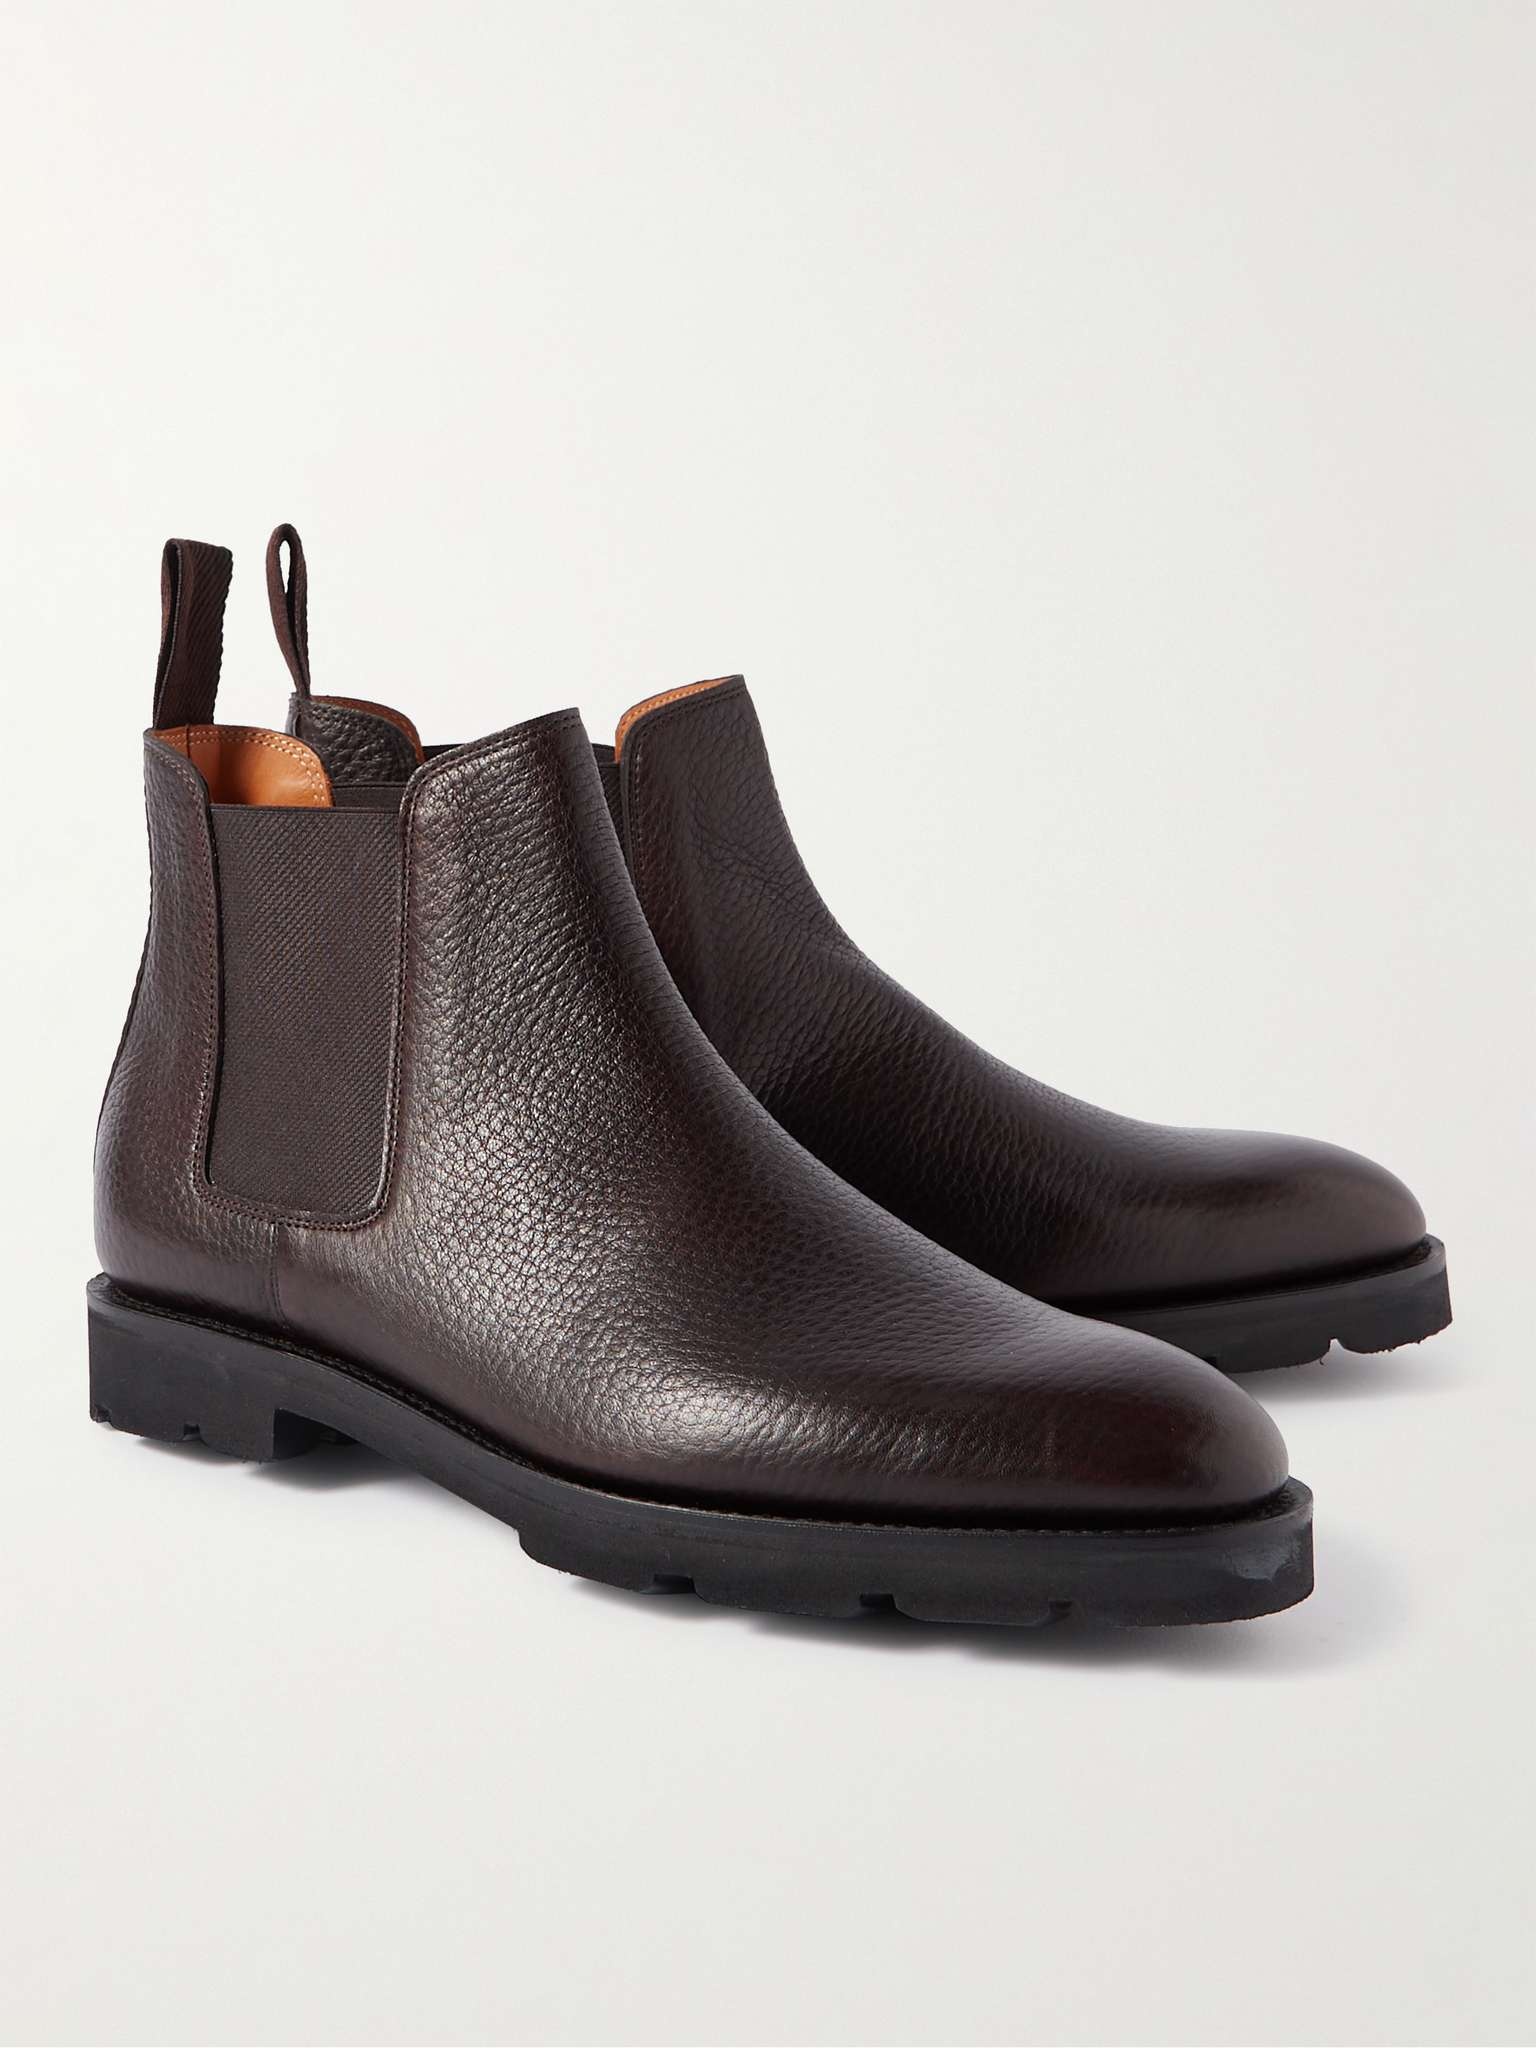 Lawry Full-Grain Leather Chelsea Boots - 3